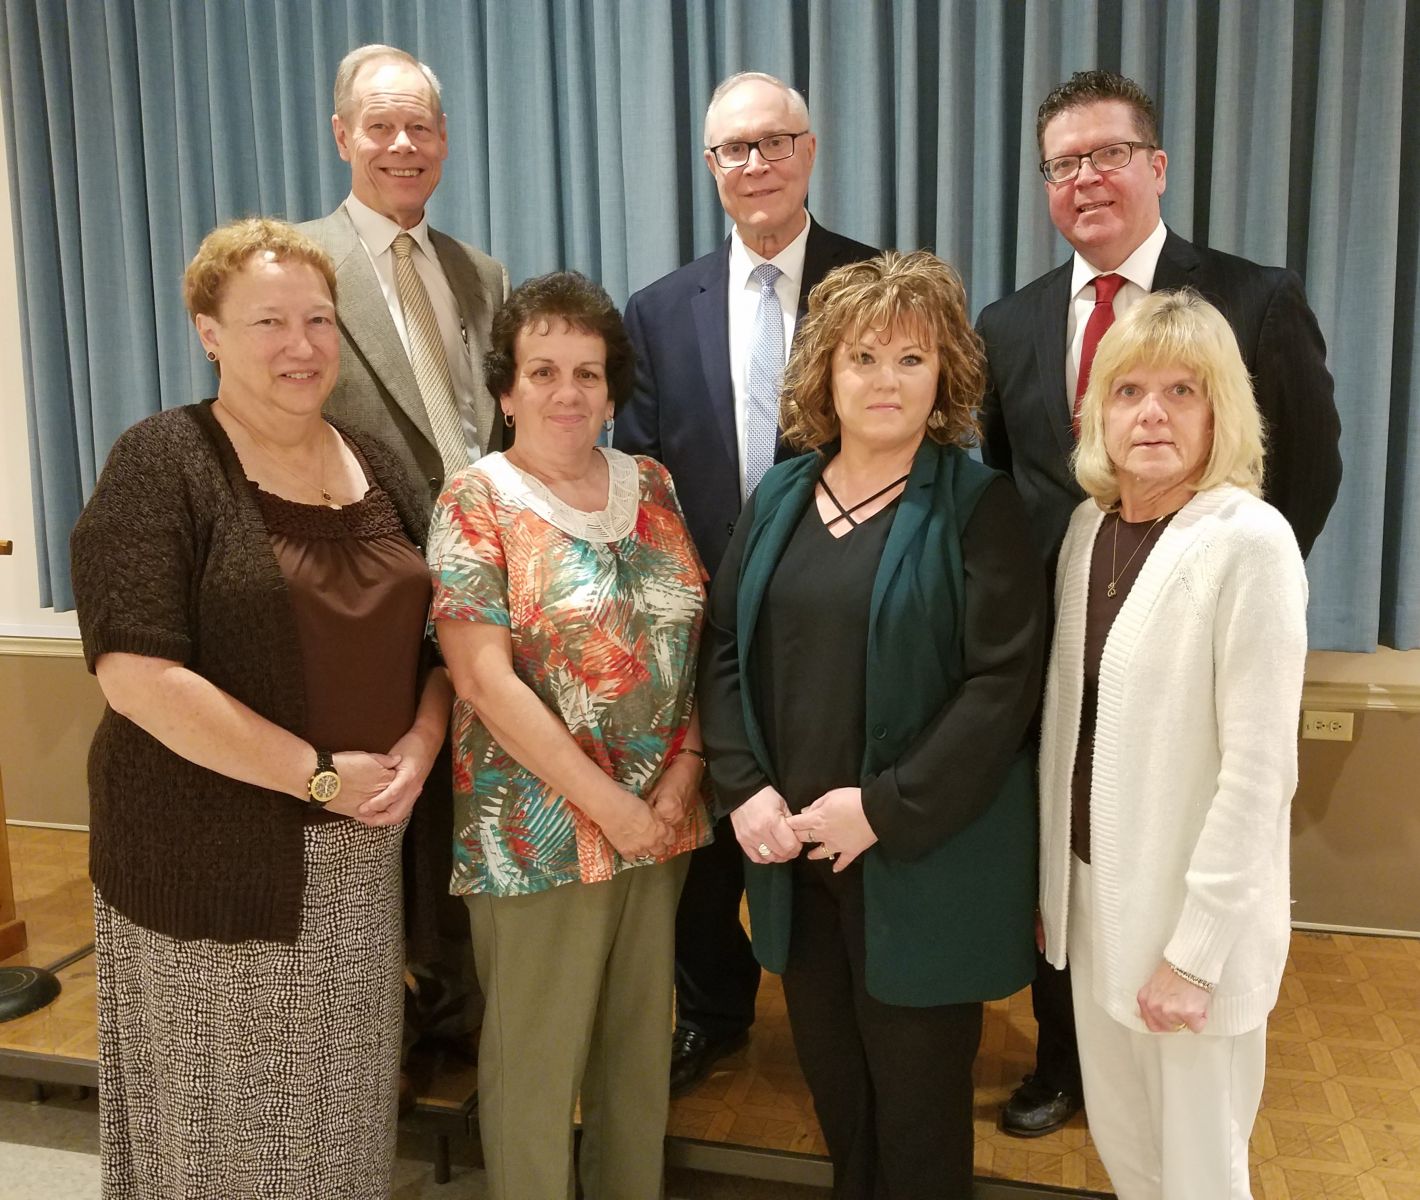 30 Years of Service Pictured above (left to right): top row- Commissioner Bob Ziobrowski, Commissioner Bob Thomas, Commissioner Chairman Dave Keller; bottom row- Mary Beavers, Carla Rock, Bonnie Zeis, Julie Bless Missing from photo: Carol Rockwell